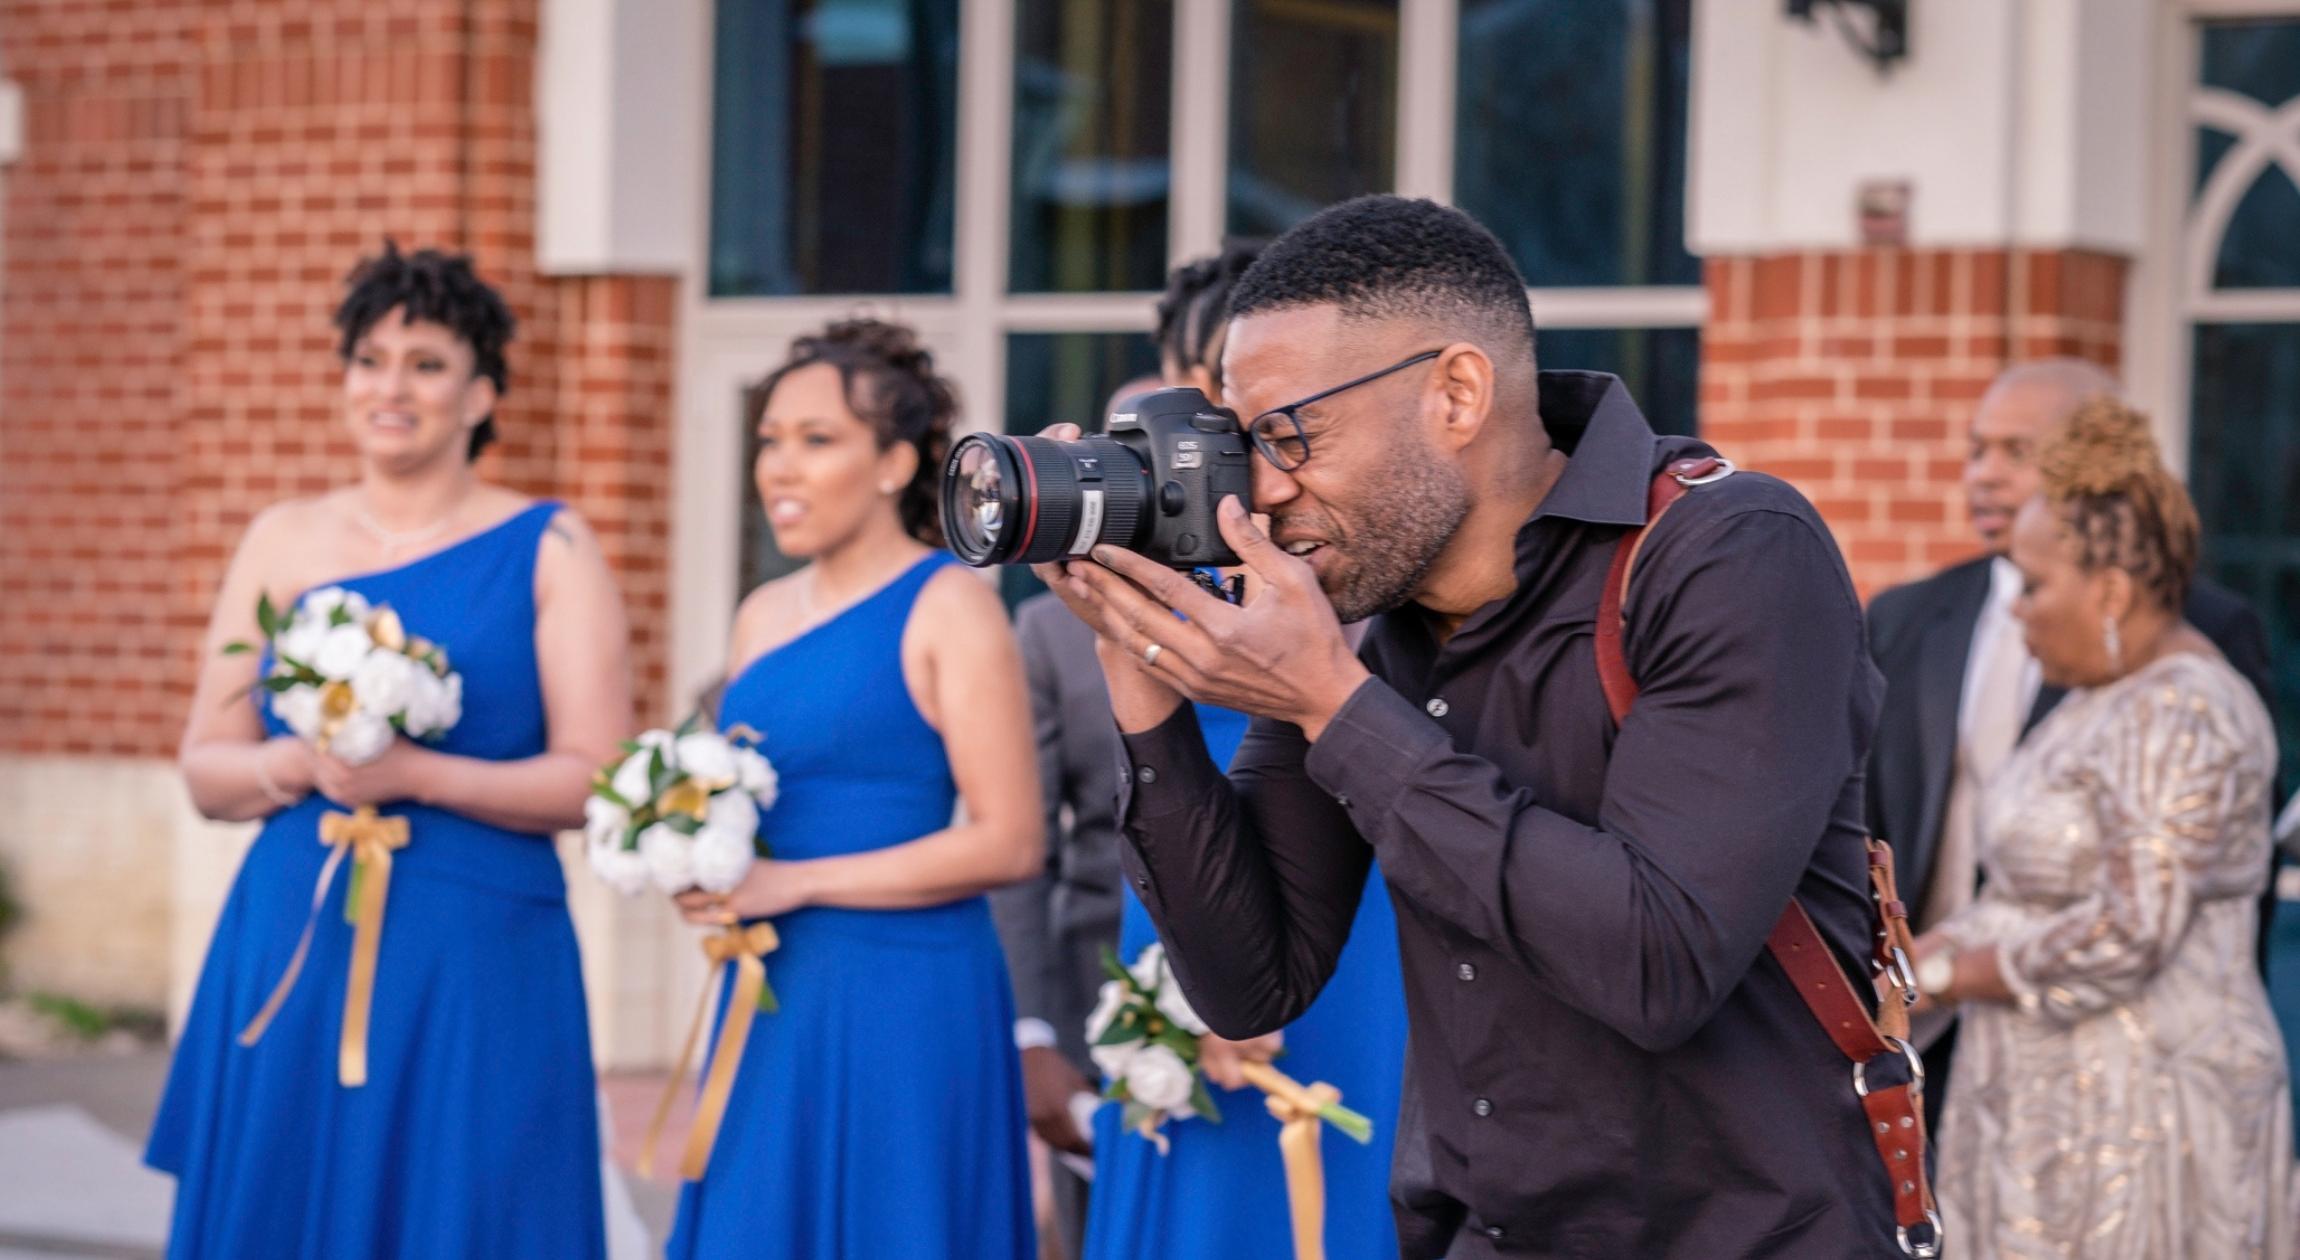 A Black photographer looks into a professional camera